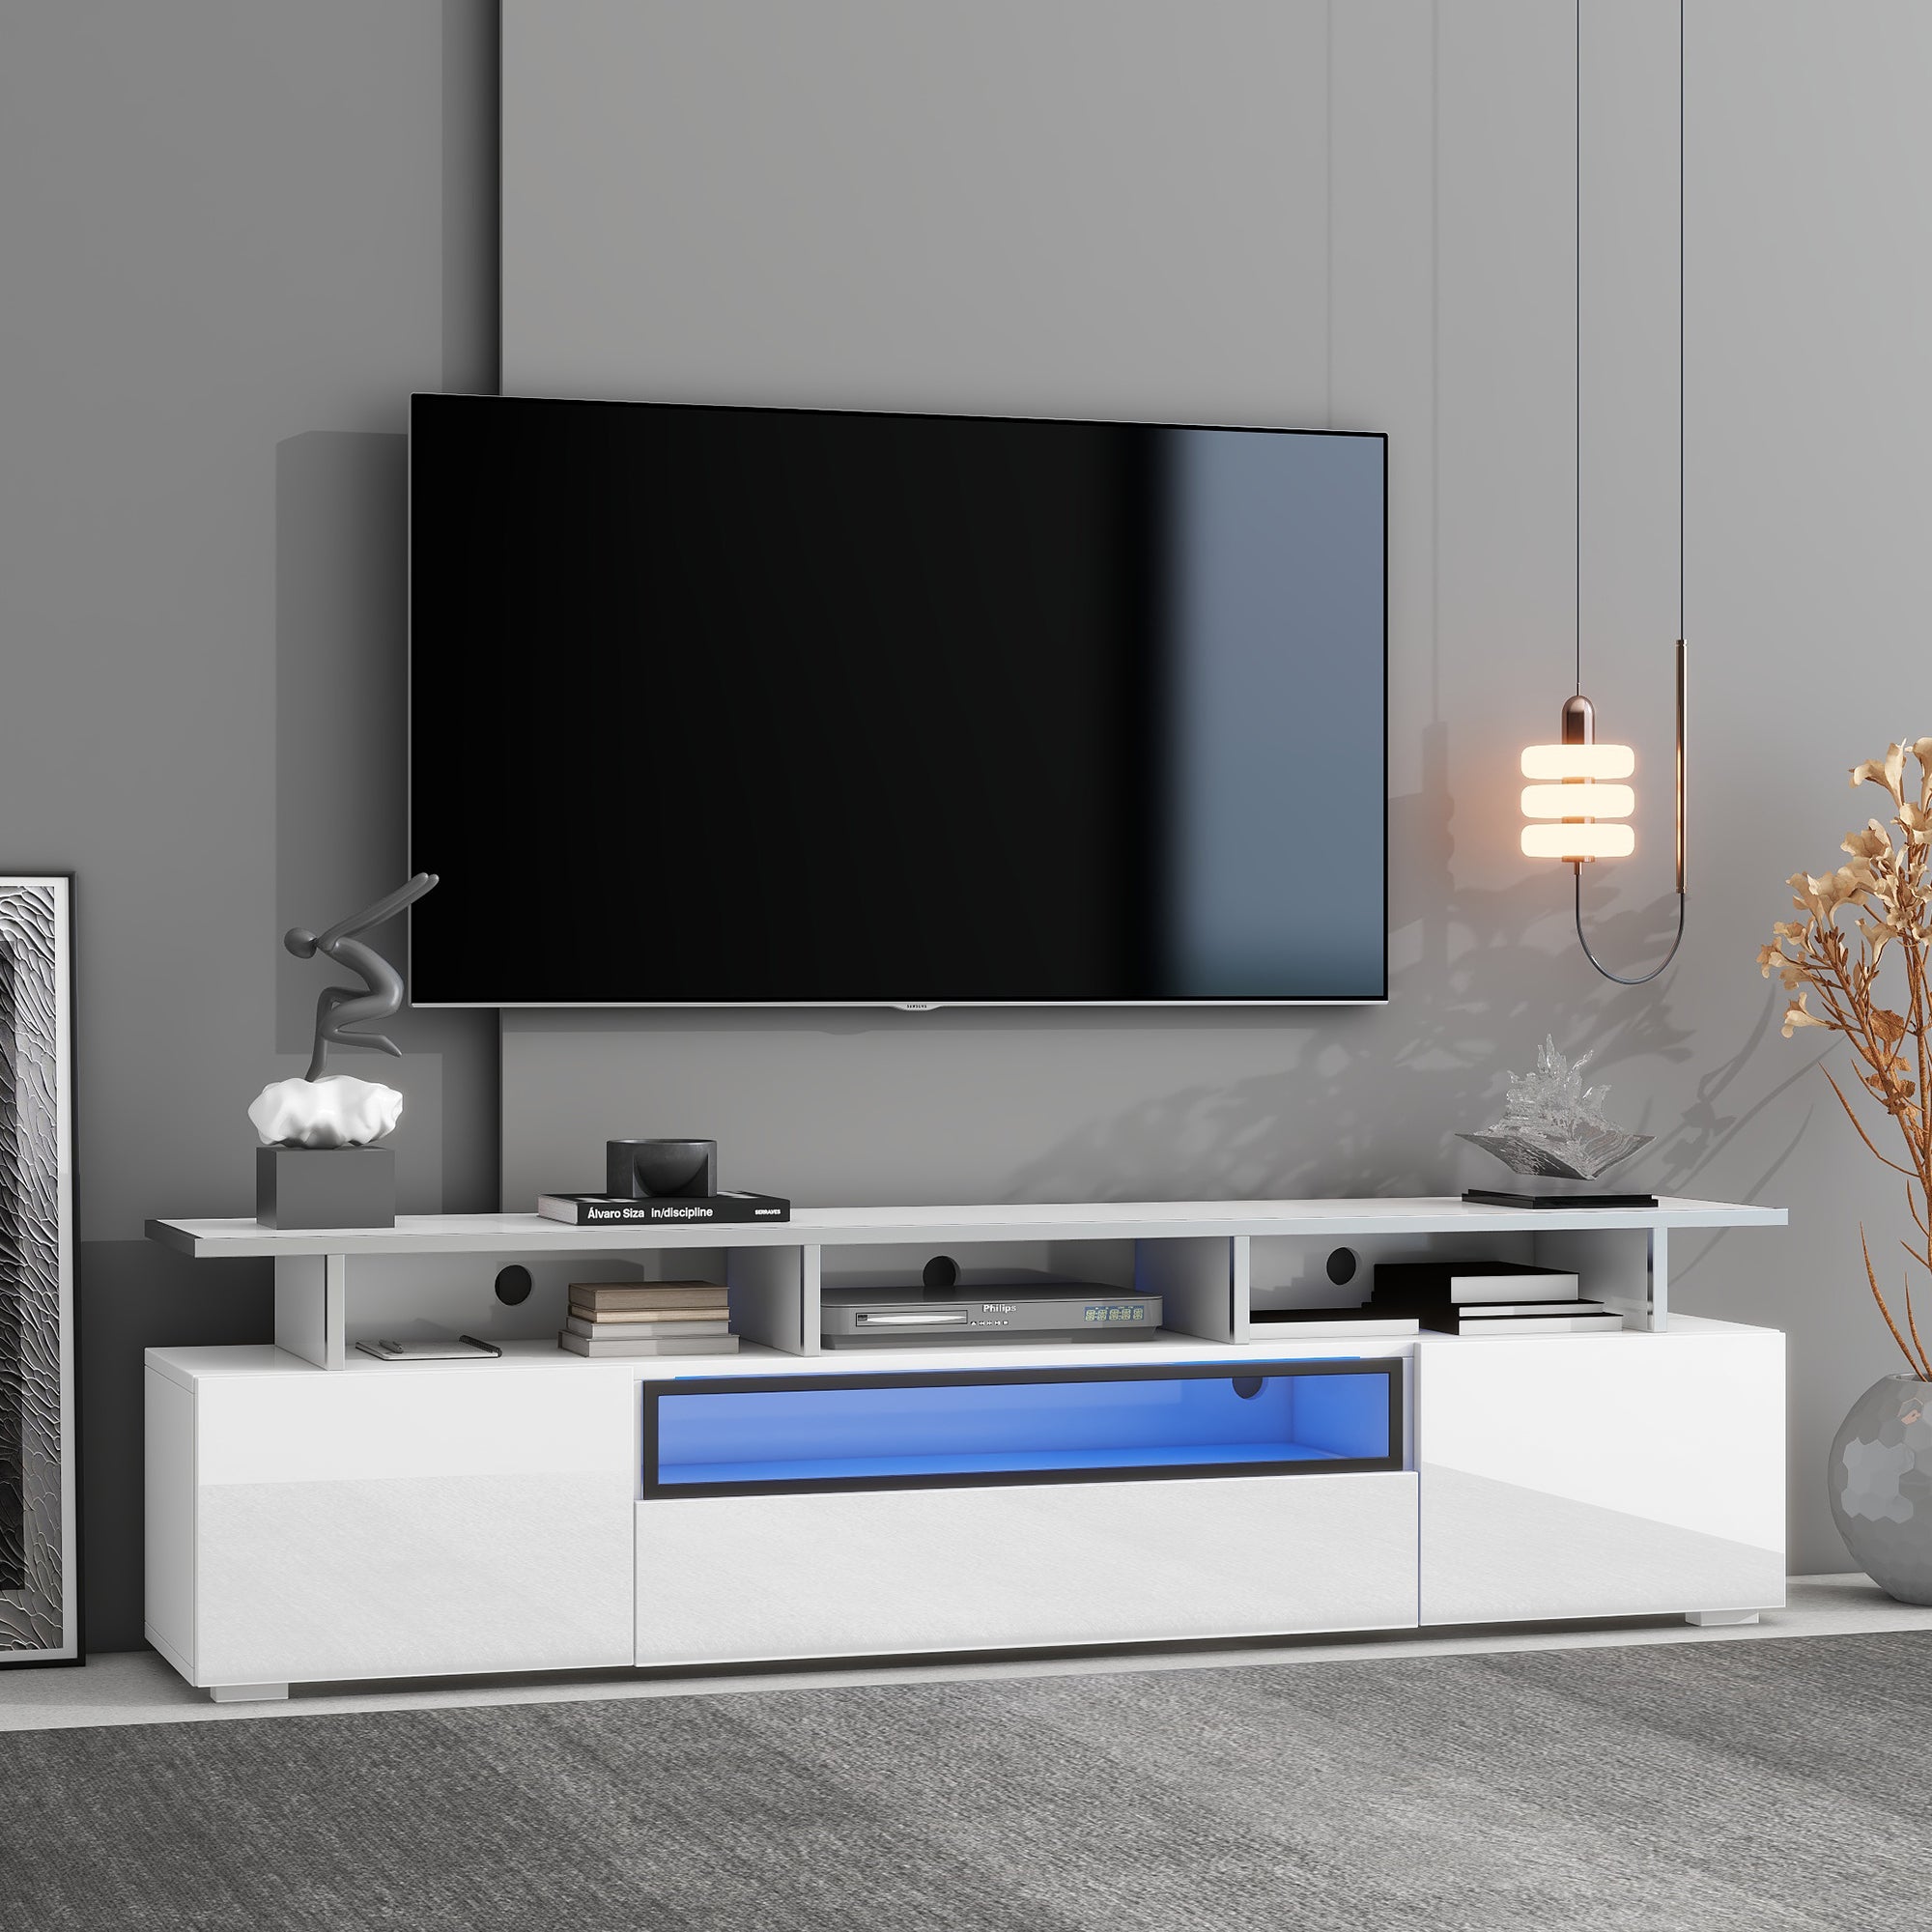 76.70"  Modern TV Stand for TV up to 89" with Push to Open Doors, UV High-Gloss Entertainment Center with Acrylic Board for TVs Up to 89", Stylish TV Cabinet with LED Color Changing Lights for Living Room